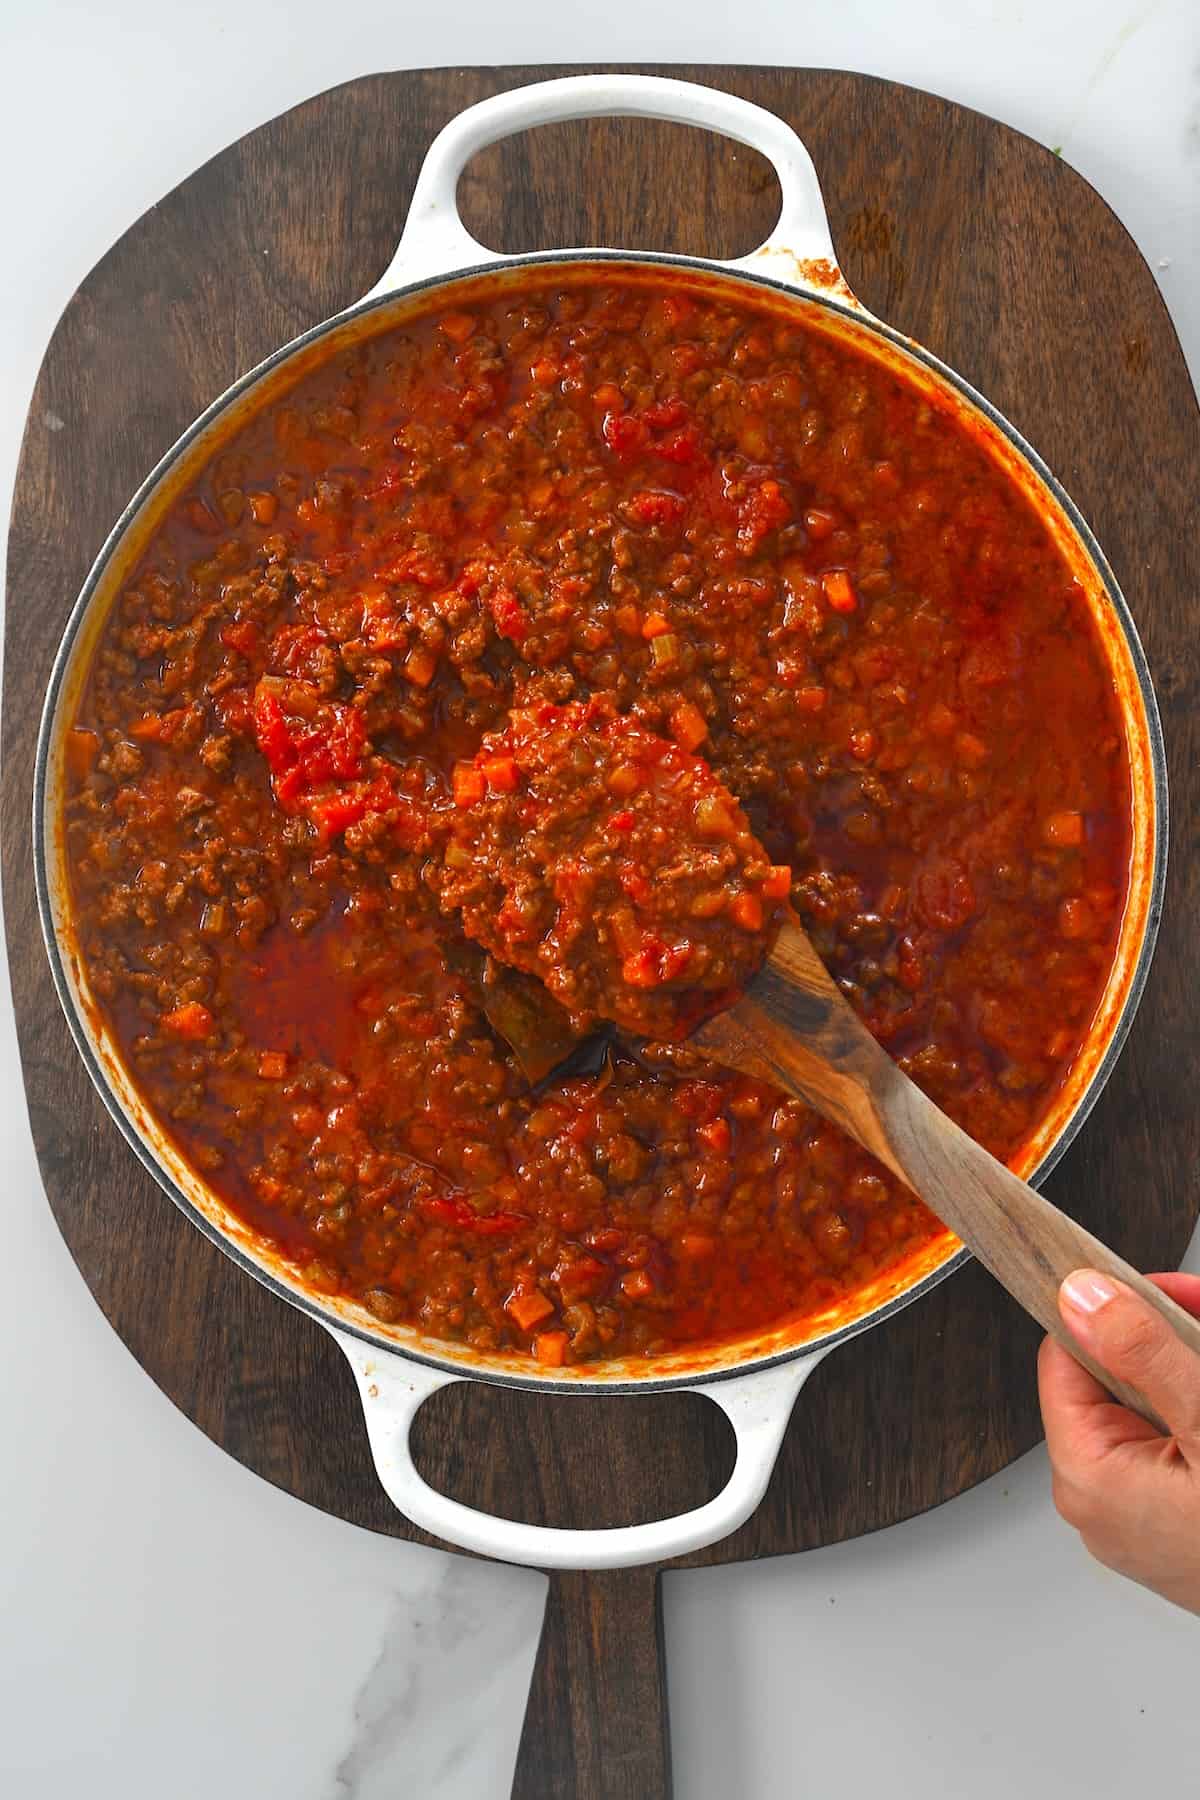 A pot with freshly made spaghetti sauce